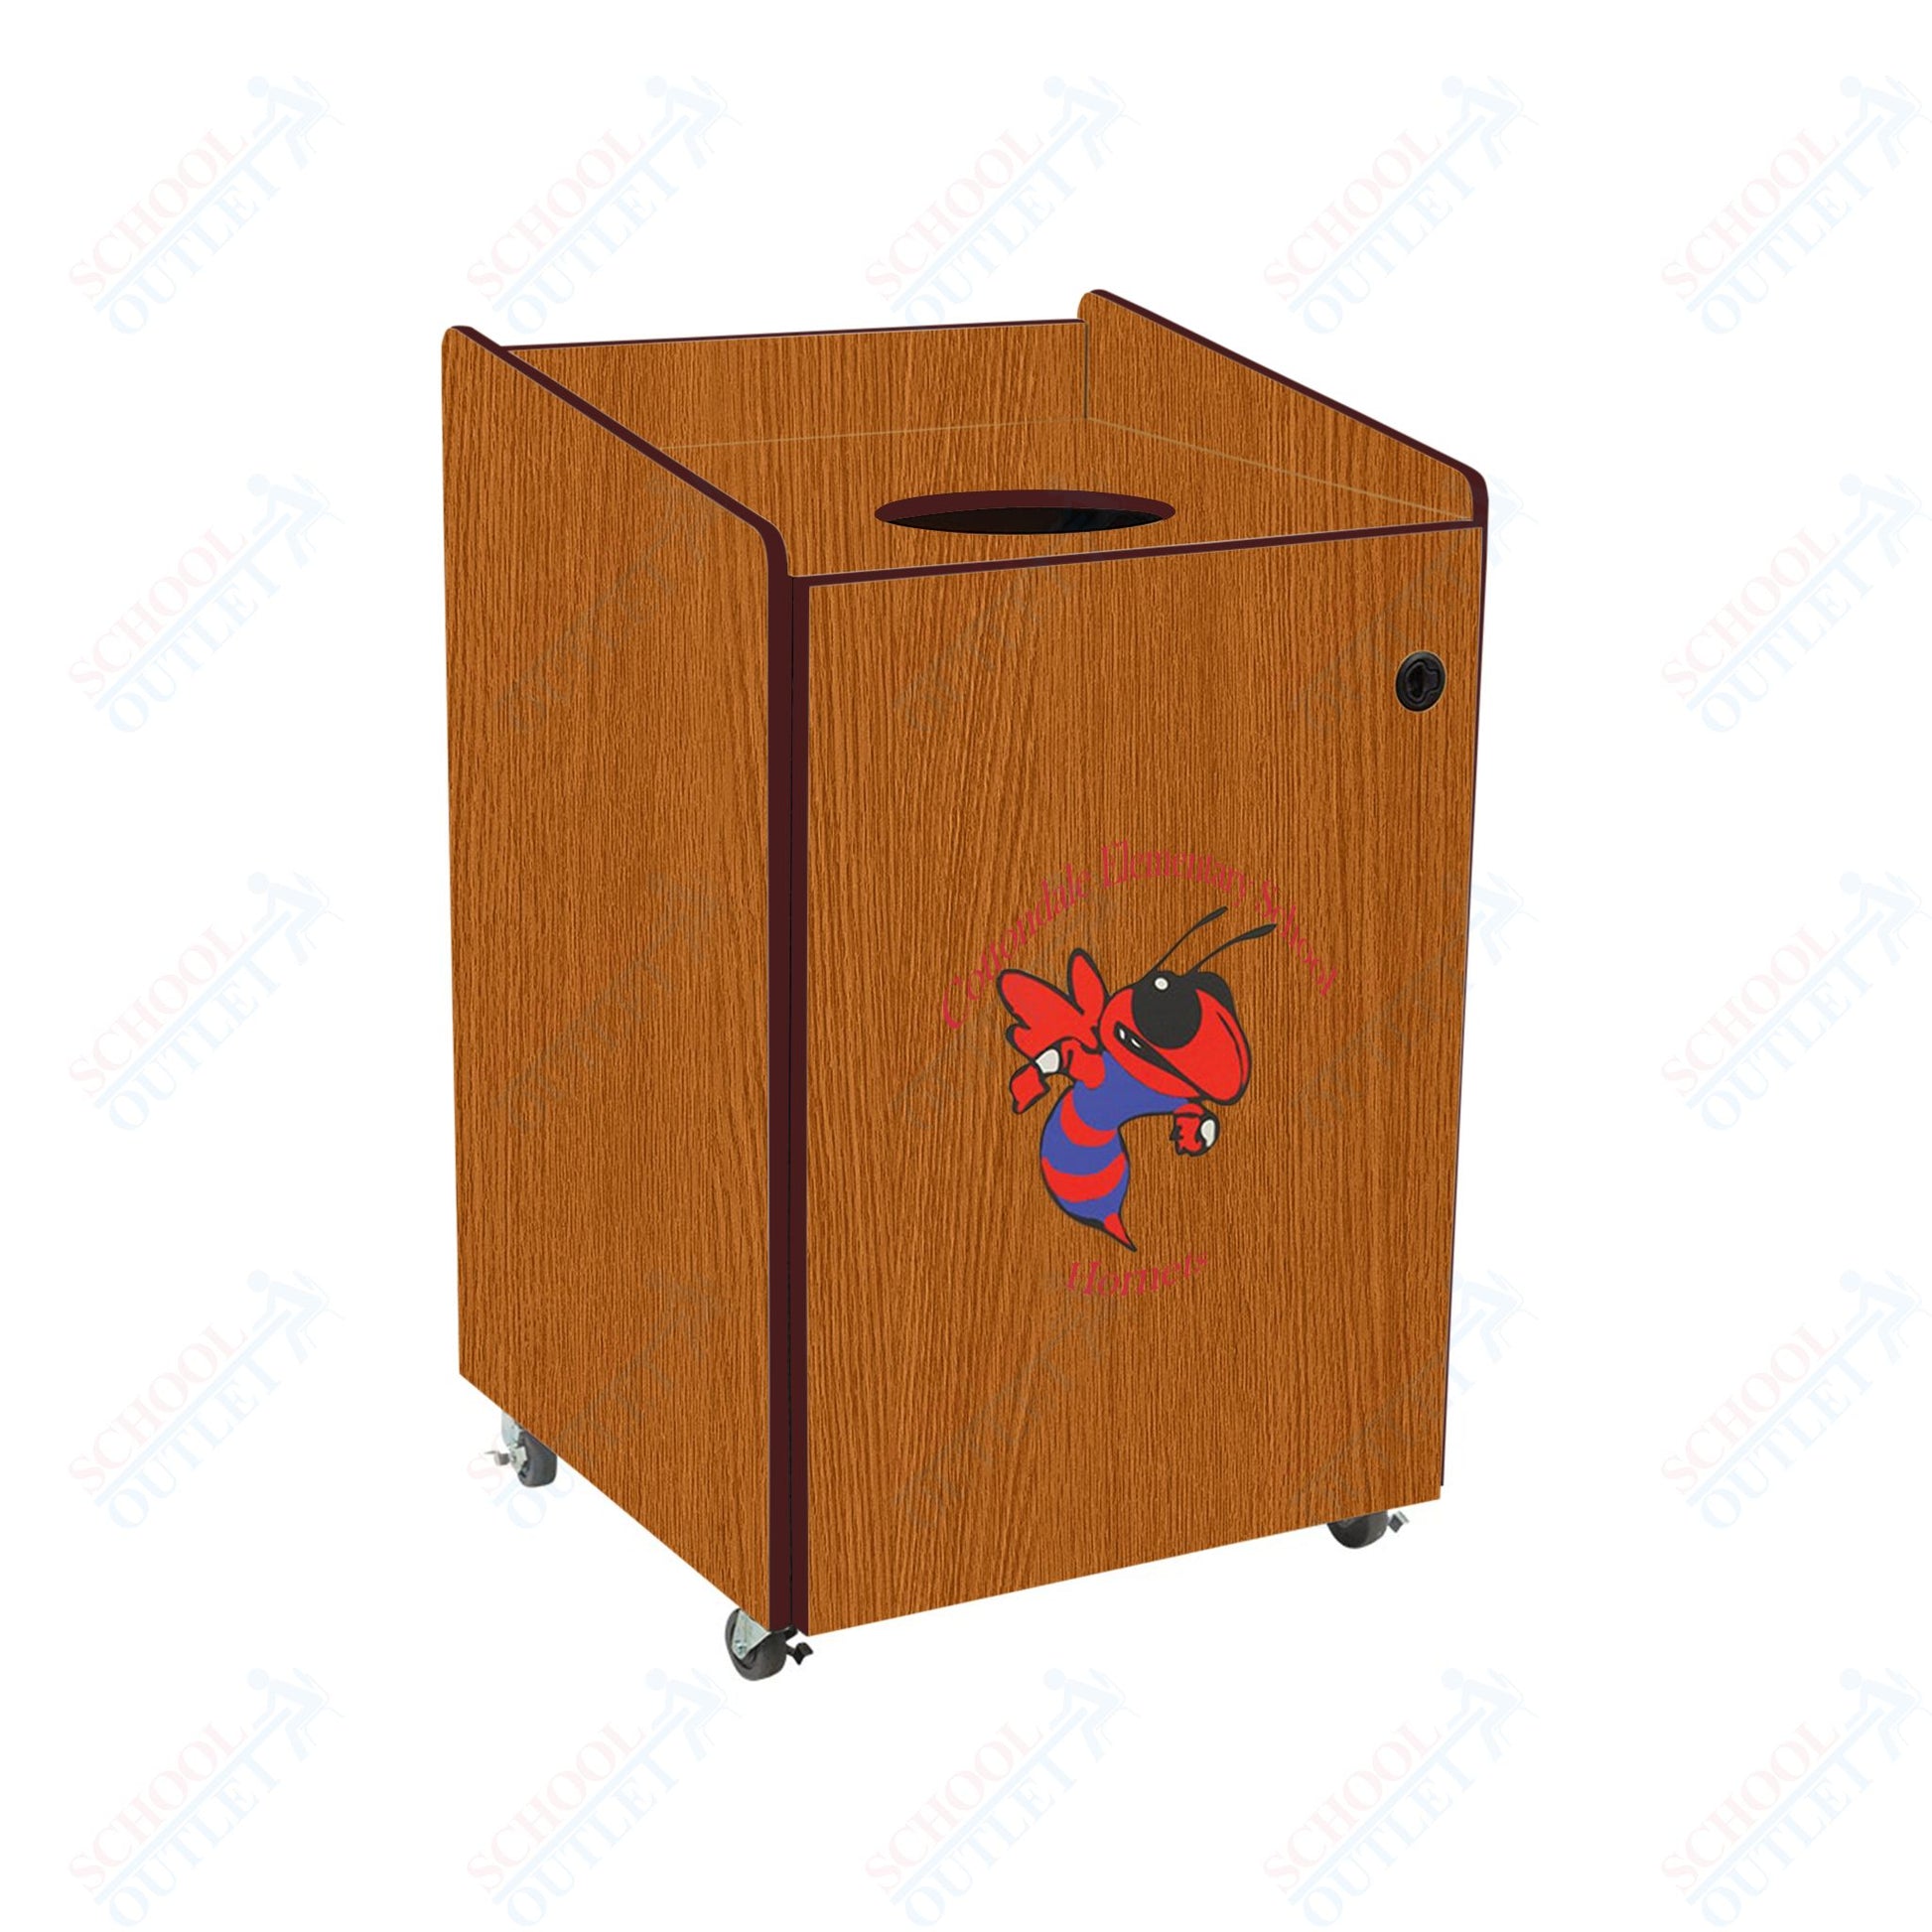 AmTab Heavy - Duty Waste Receptacle - Applicable for 55 Gallon Cans and Drums - 33"W x 32"L x 50"H (AMT - HDWR55) - SchoolOutlet